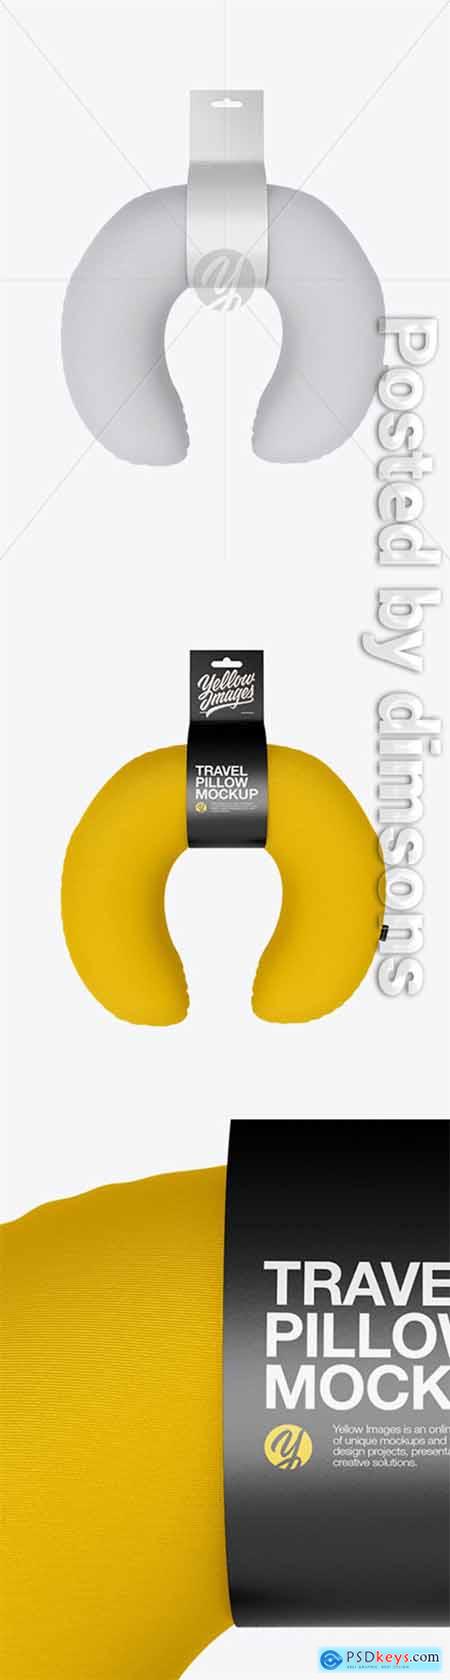 Travel Pillow Mockup - Front View 29991